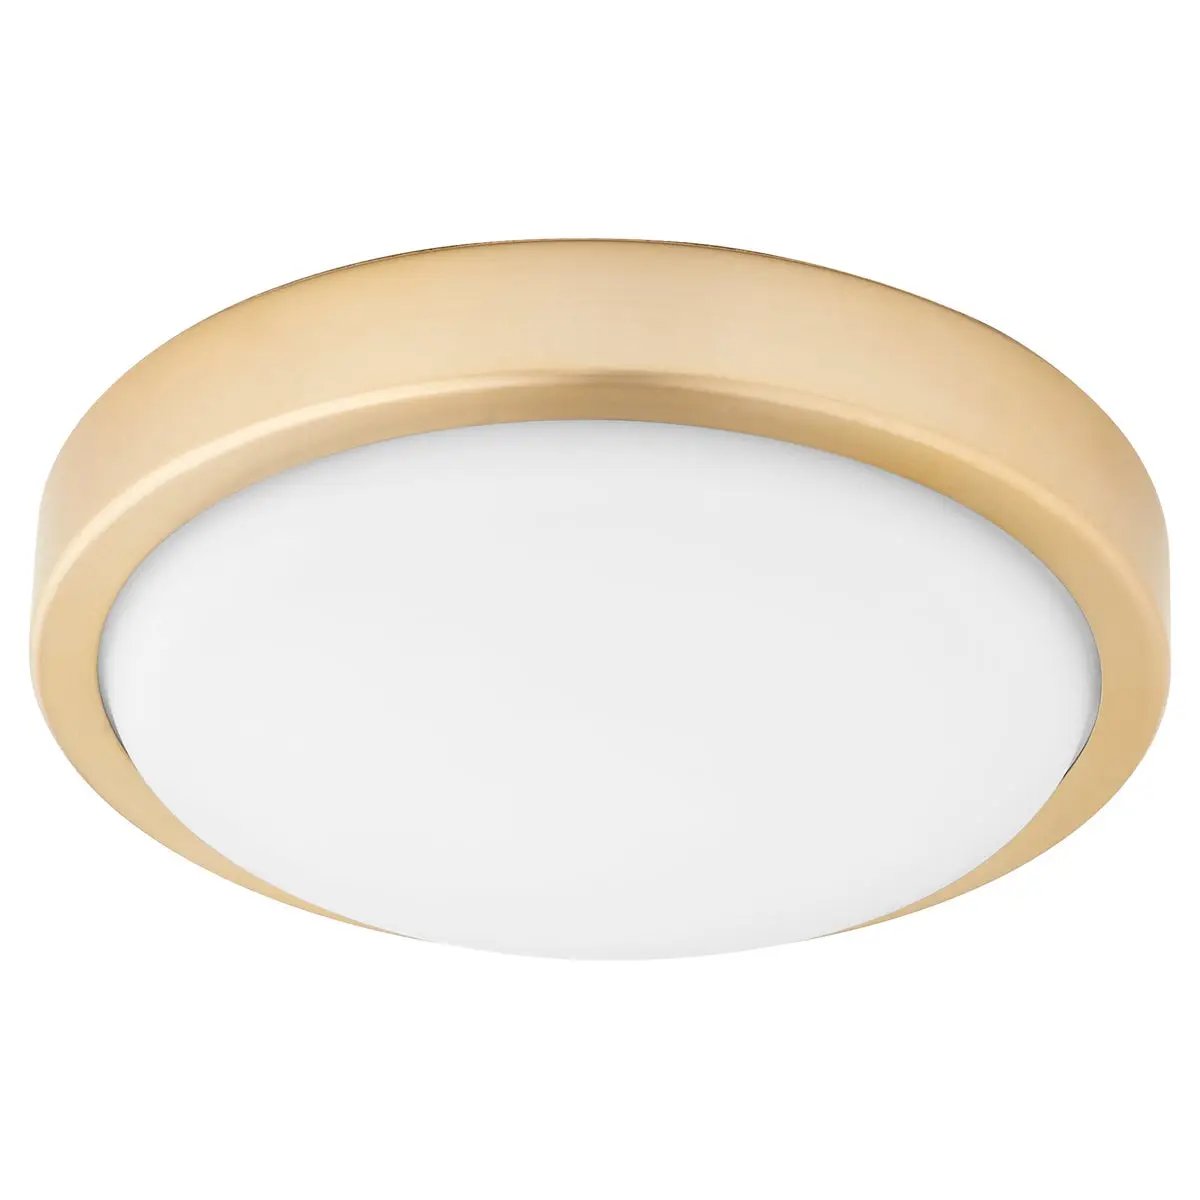 A modern LED light fixture for ceiling fans, suitable for all decor styles. Energy-efficient and long-lasting, this Quorum International ceiling fan light kit includes 1 dimmable LED lamp. Available in Aged Brass, Matte Black, Oiled Bronze, Satin Nickel, or Studio White finish. Dimensions: 8.75"W x 2.25"H. UL Listed for damp locations. 2-year warranty.